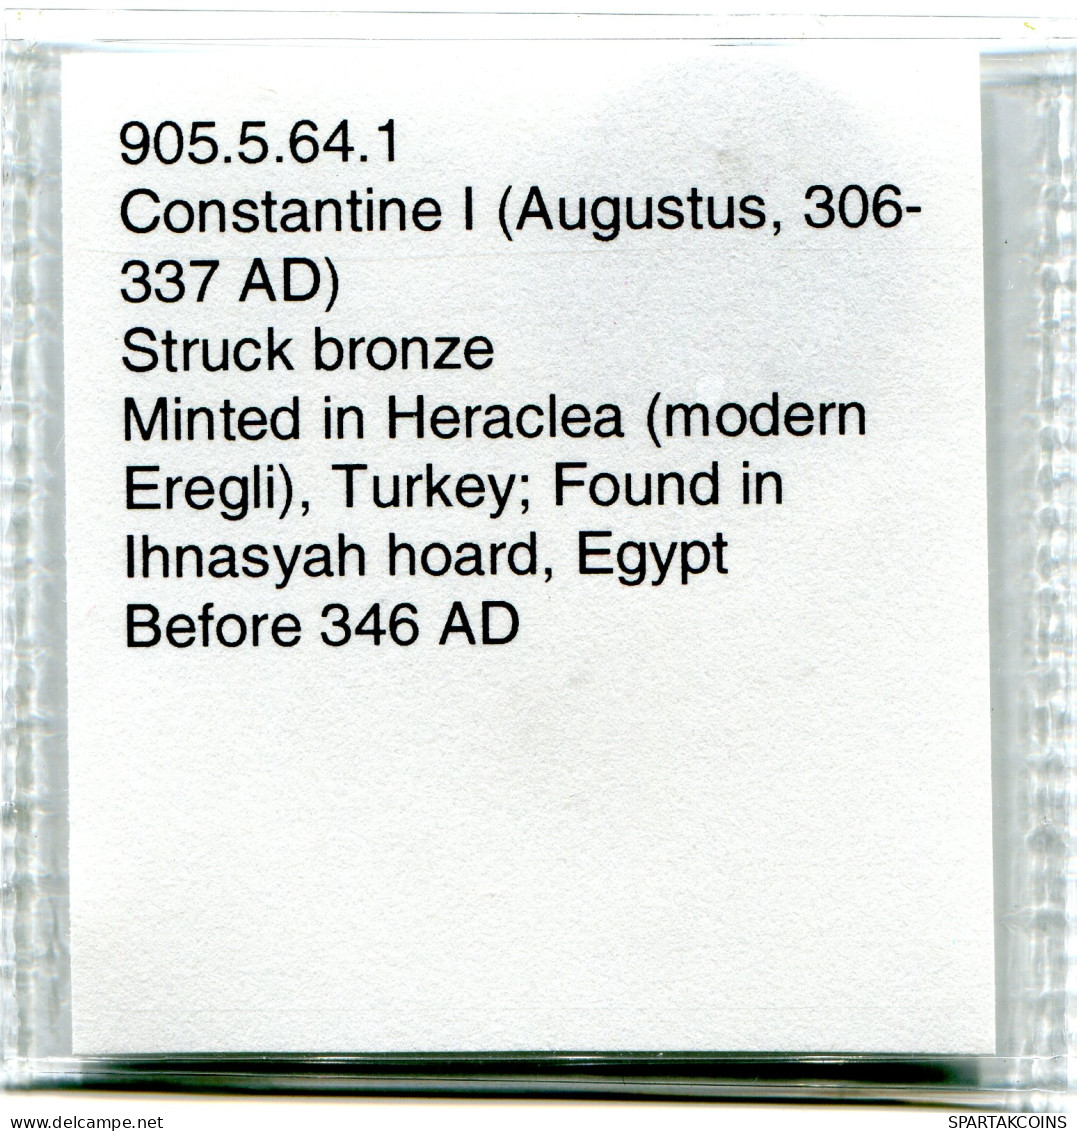 CONSTANTINE I MINTED IN HERACLEA FOUND IN IHNASYAH HOARD EGYPT #ANC11196.14.F.A - L'Empire Chrétien (307 à 363)